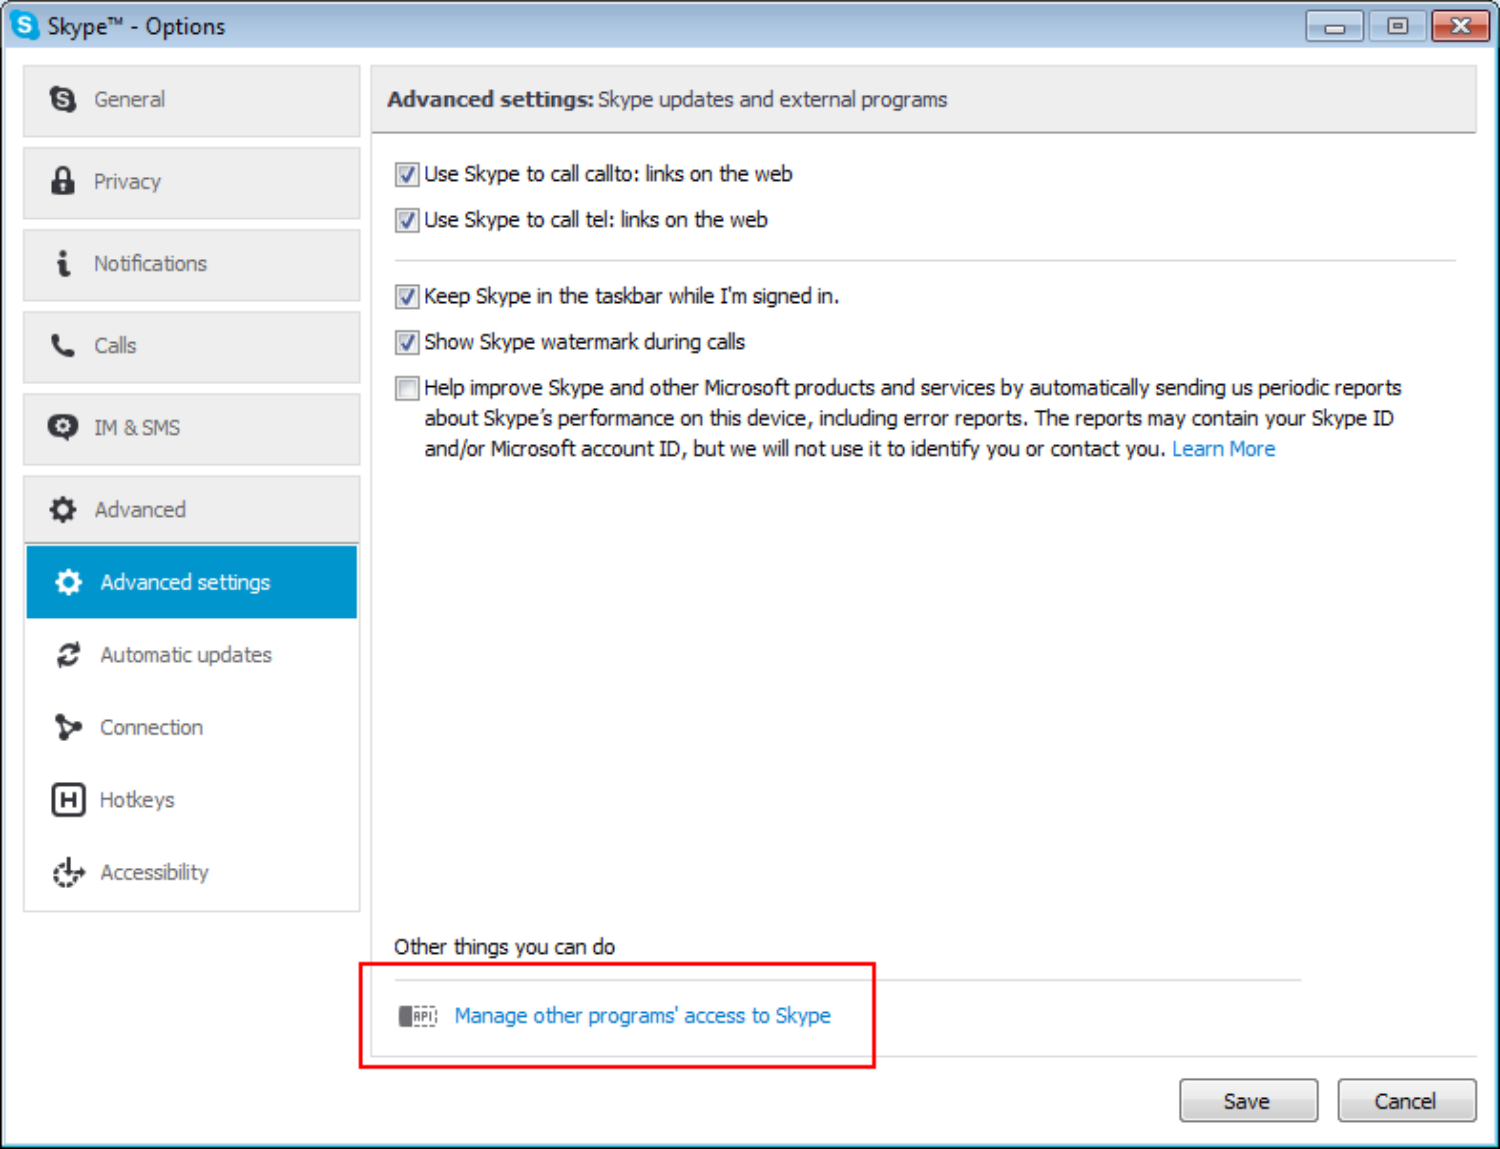 manage other programs access to Skype.”